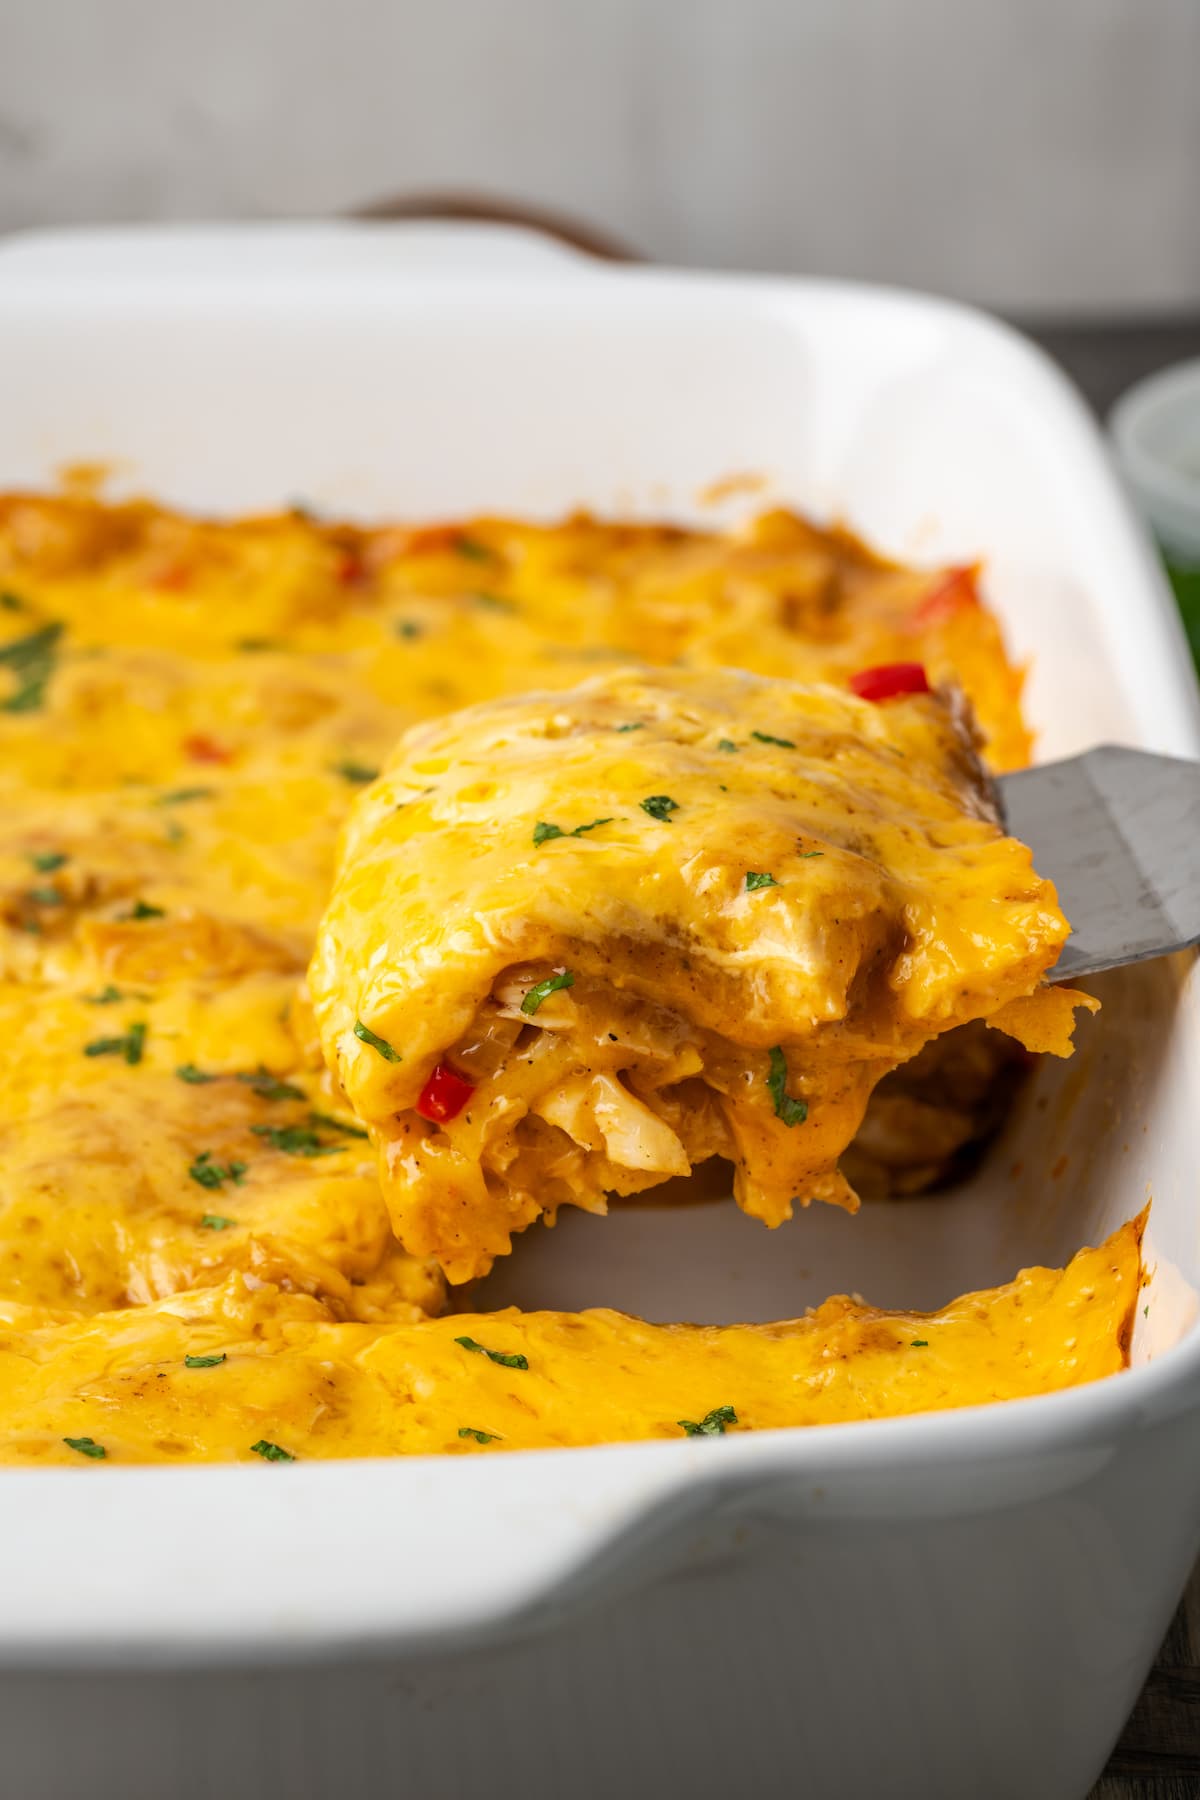 A slice of King Ranch chicken is lifted from a casserole dish.